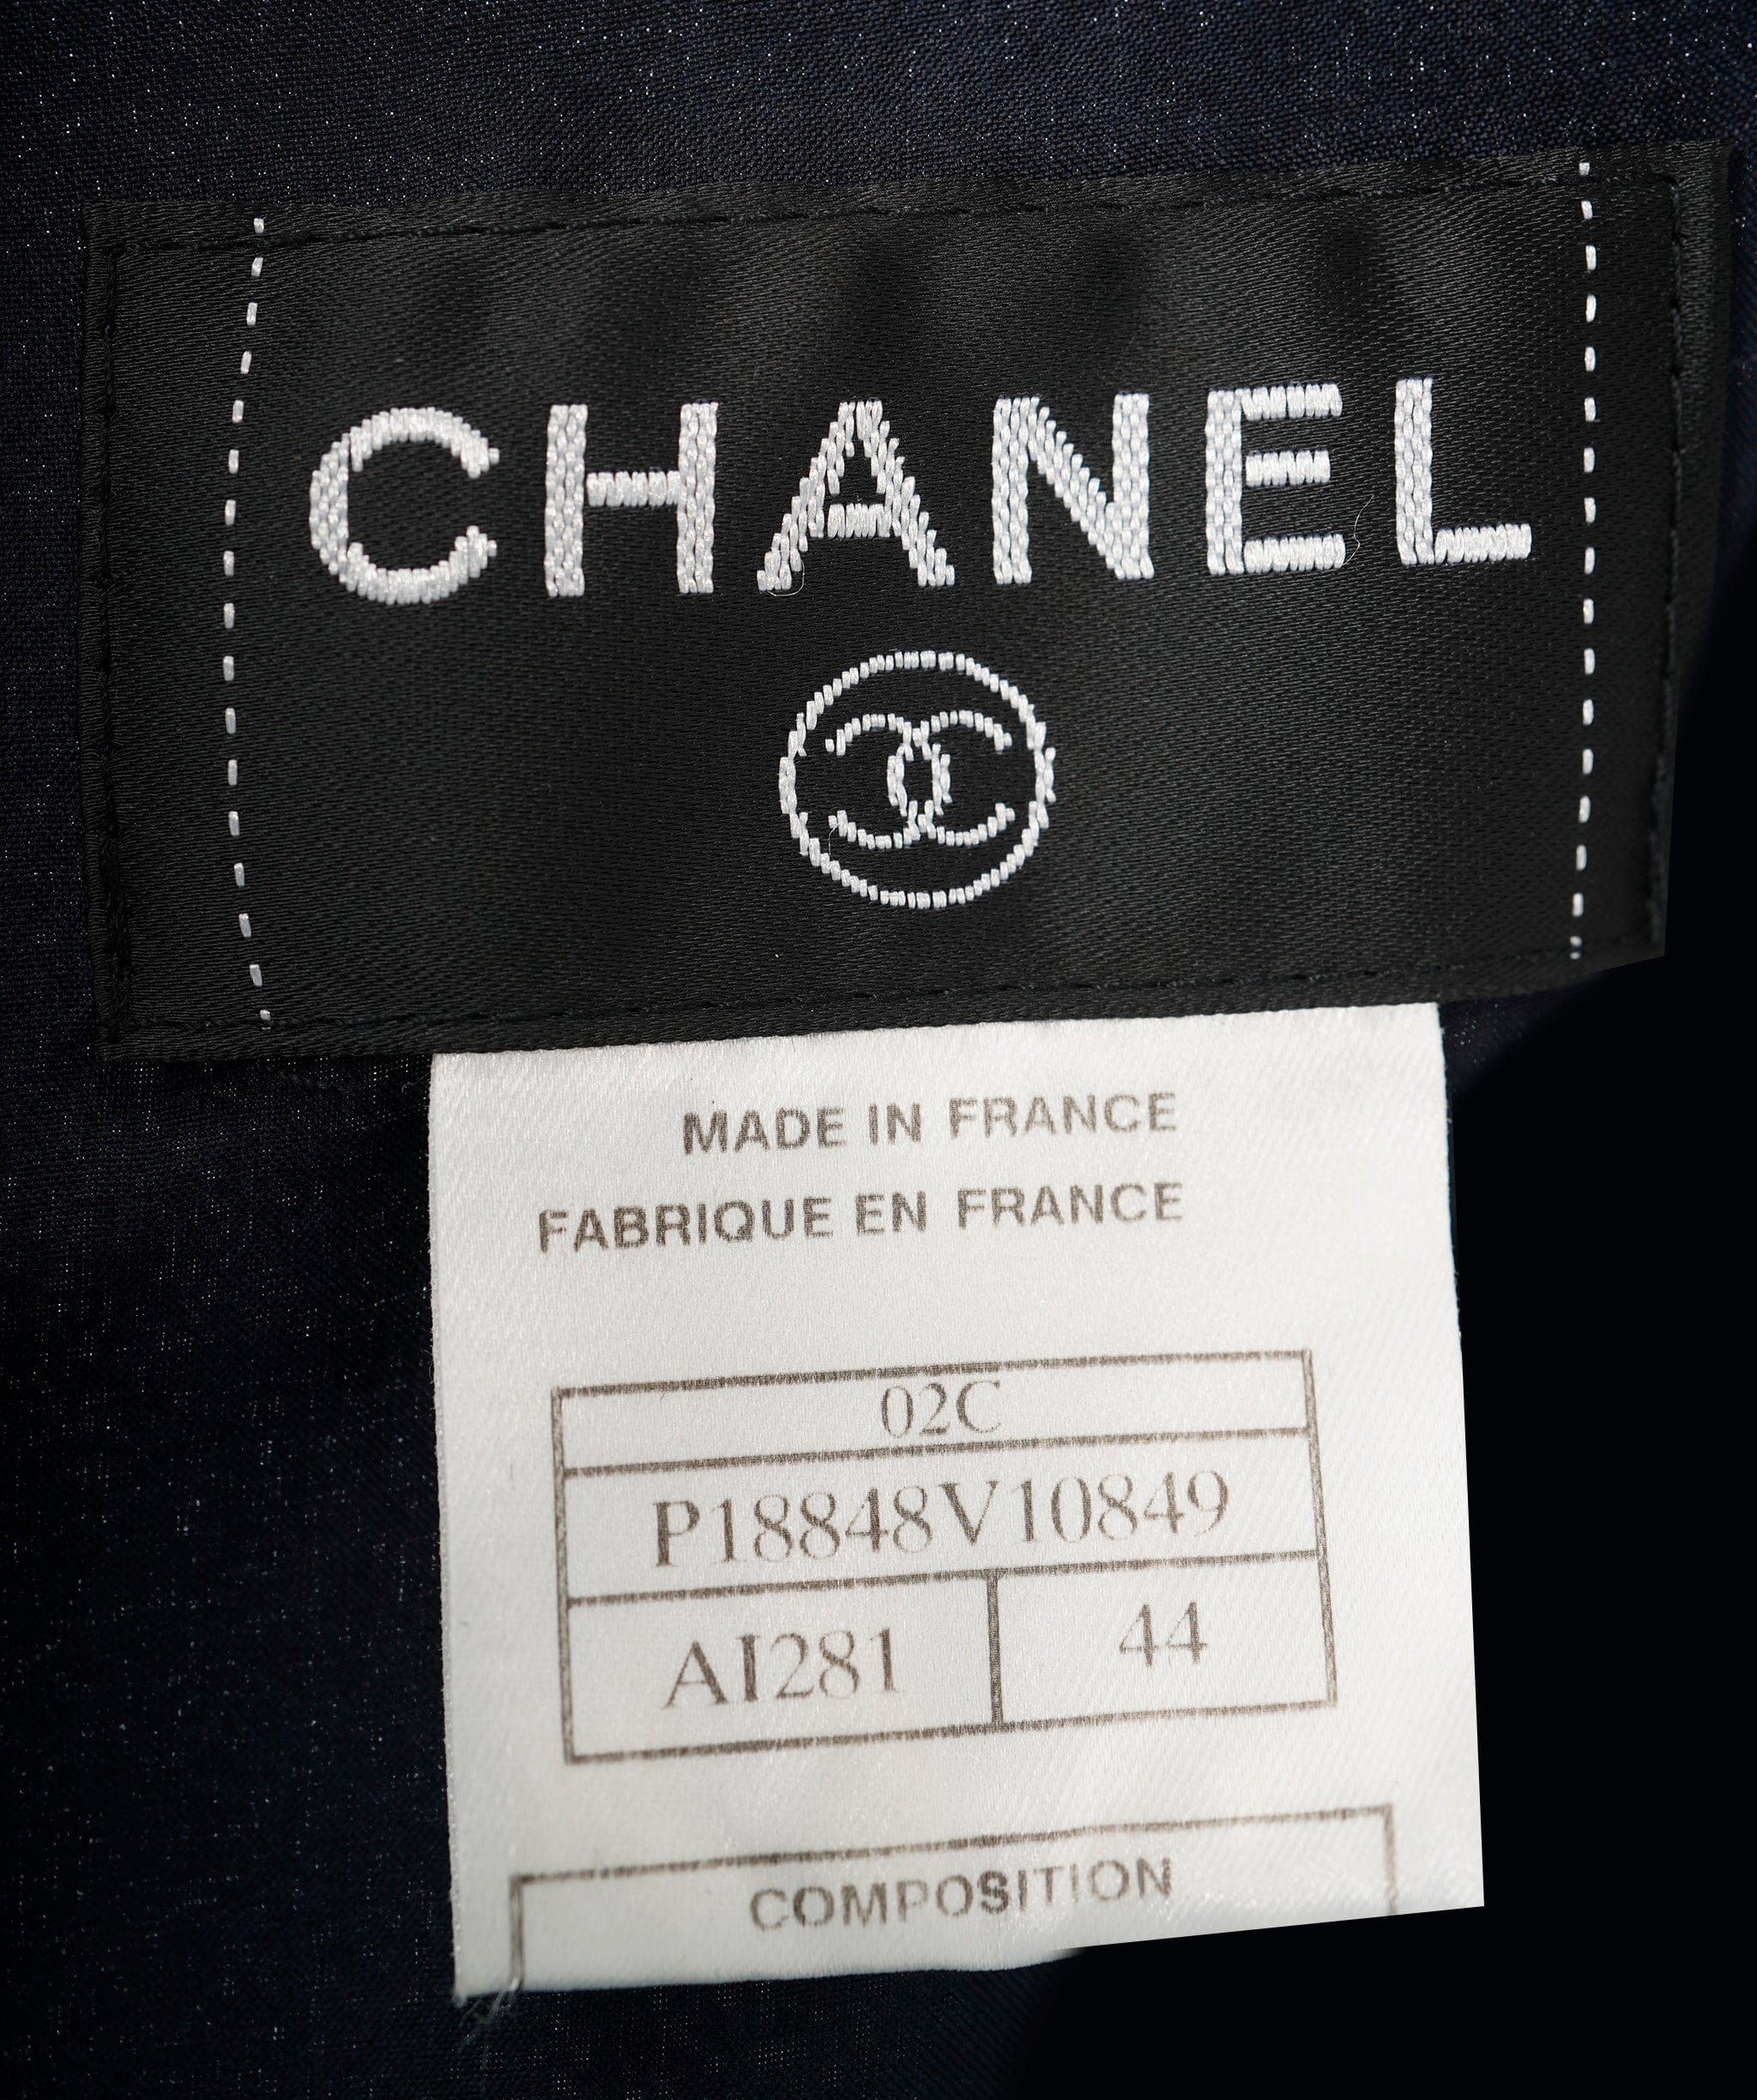 Chanel Chanel silk fitted dress size EU44 - AWL3201